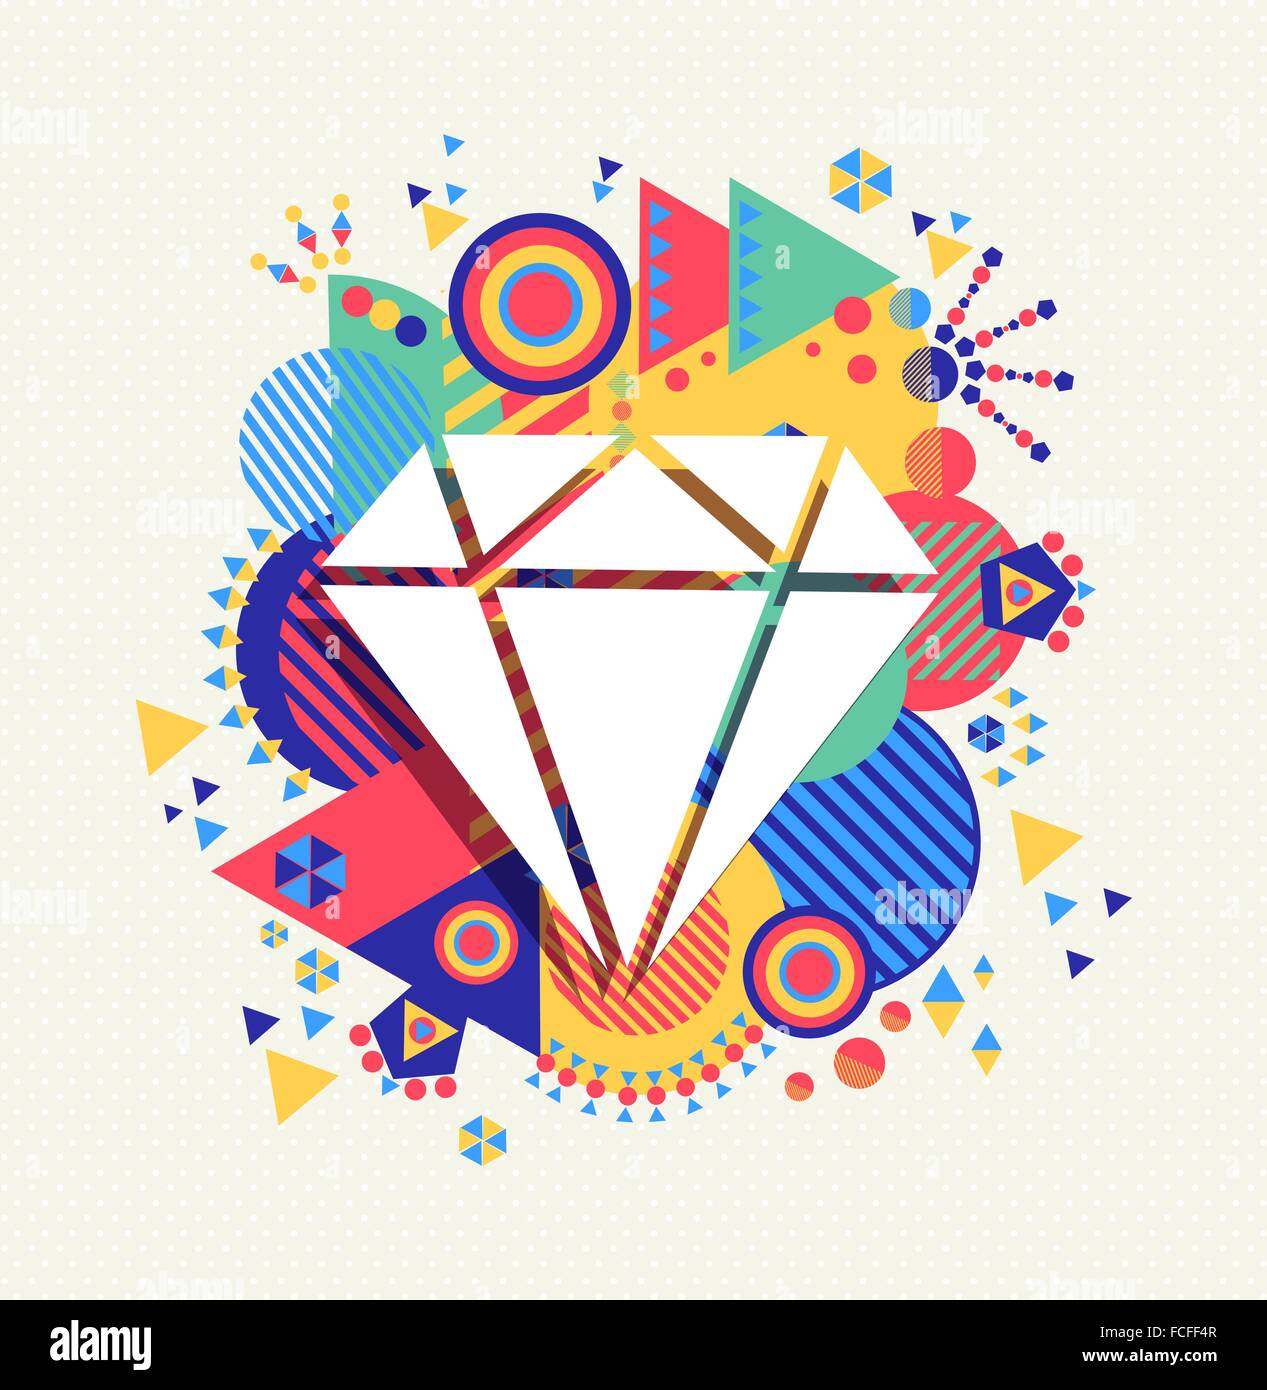 Diamond icon, luxury fashion concept design with colorful vibrant geometry shapes background. EPS10 vector. Stock Vector